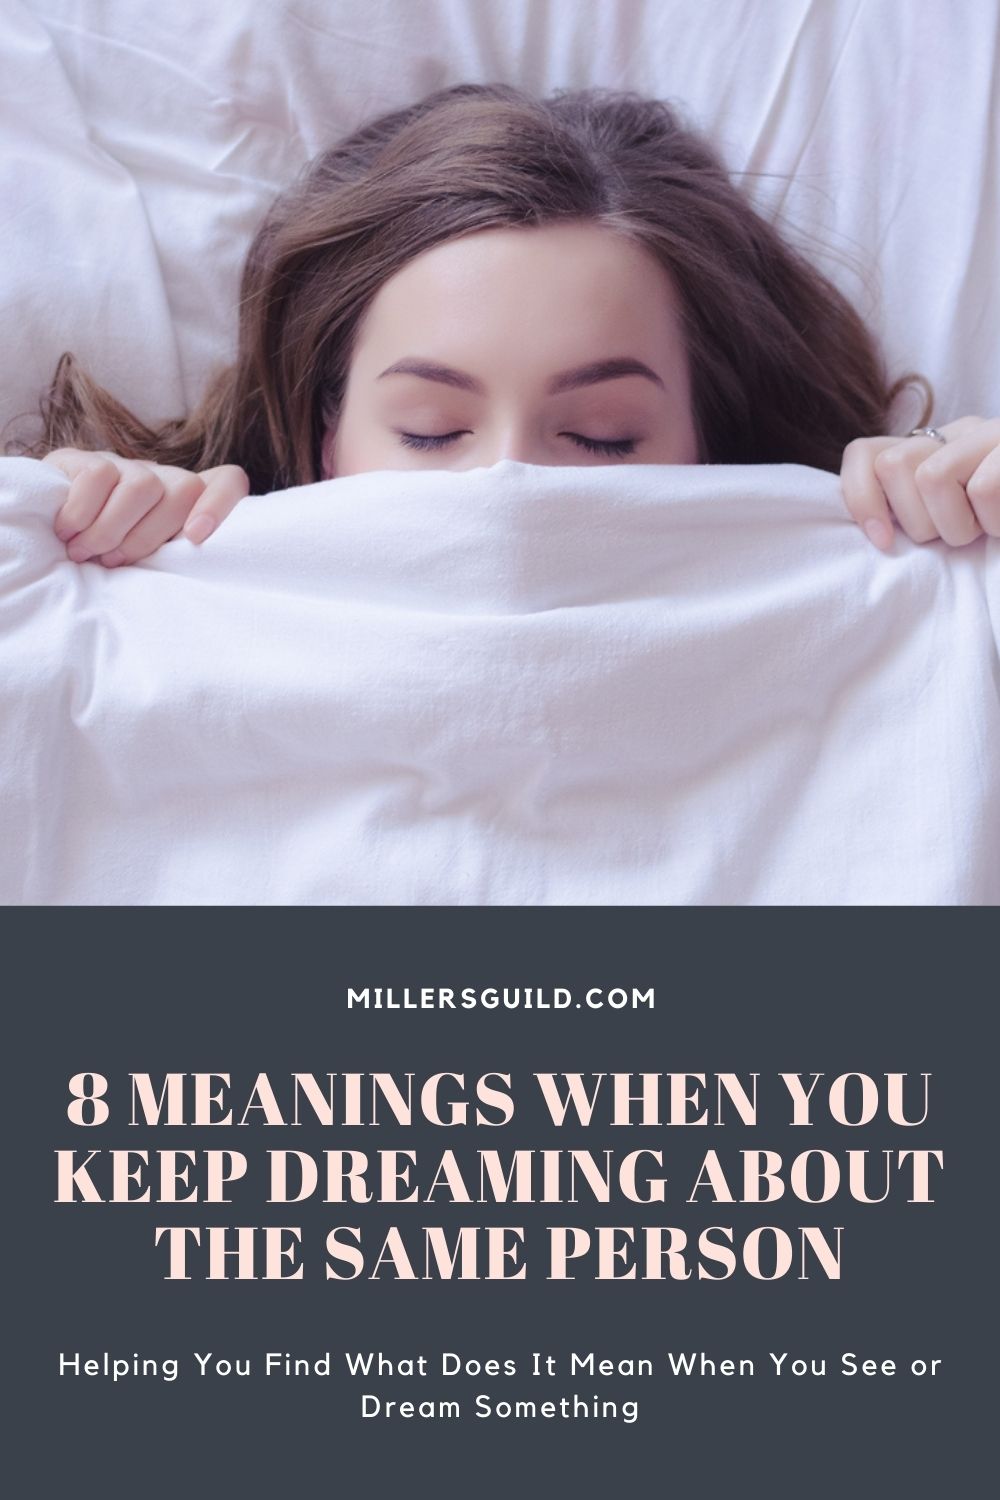 8 Meanings When You Keep Dreaming About the Same Person 2